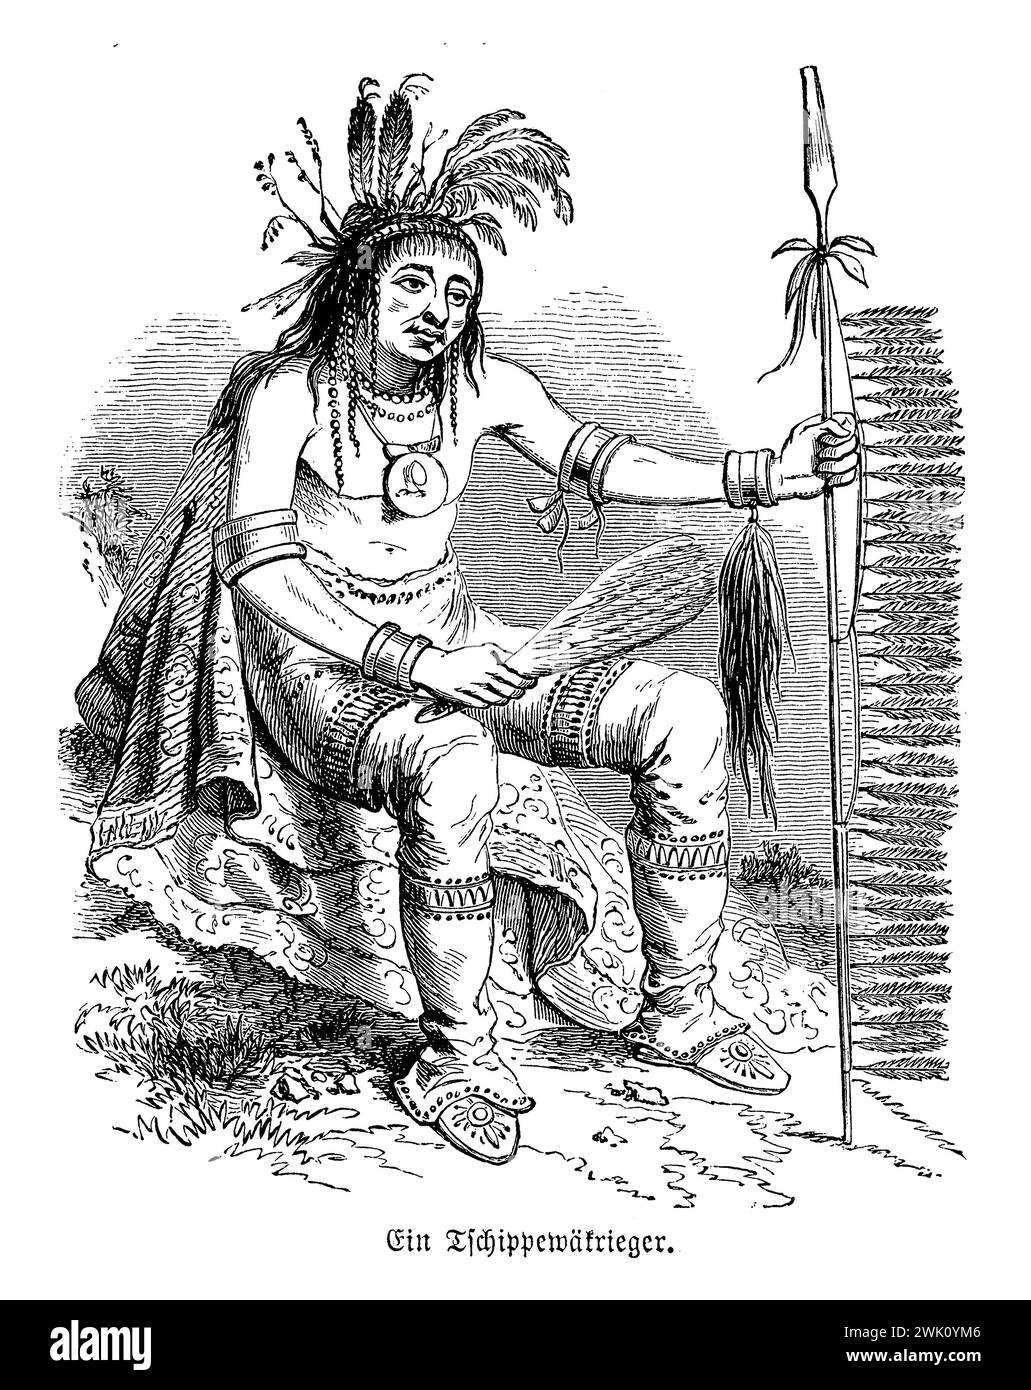 Portrait of  North American native Chippewa warrior with spear, hairdressing and costume,19th century illustration Stock Photo